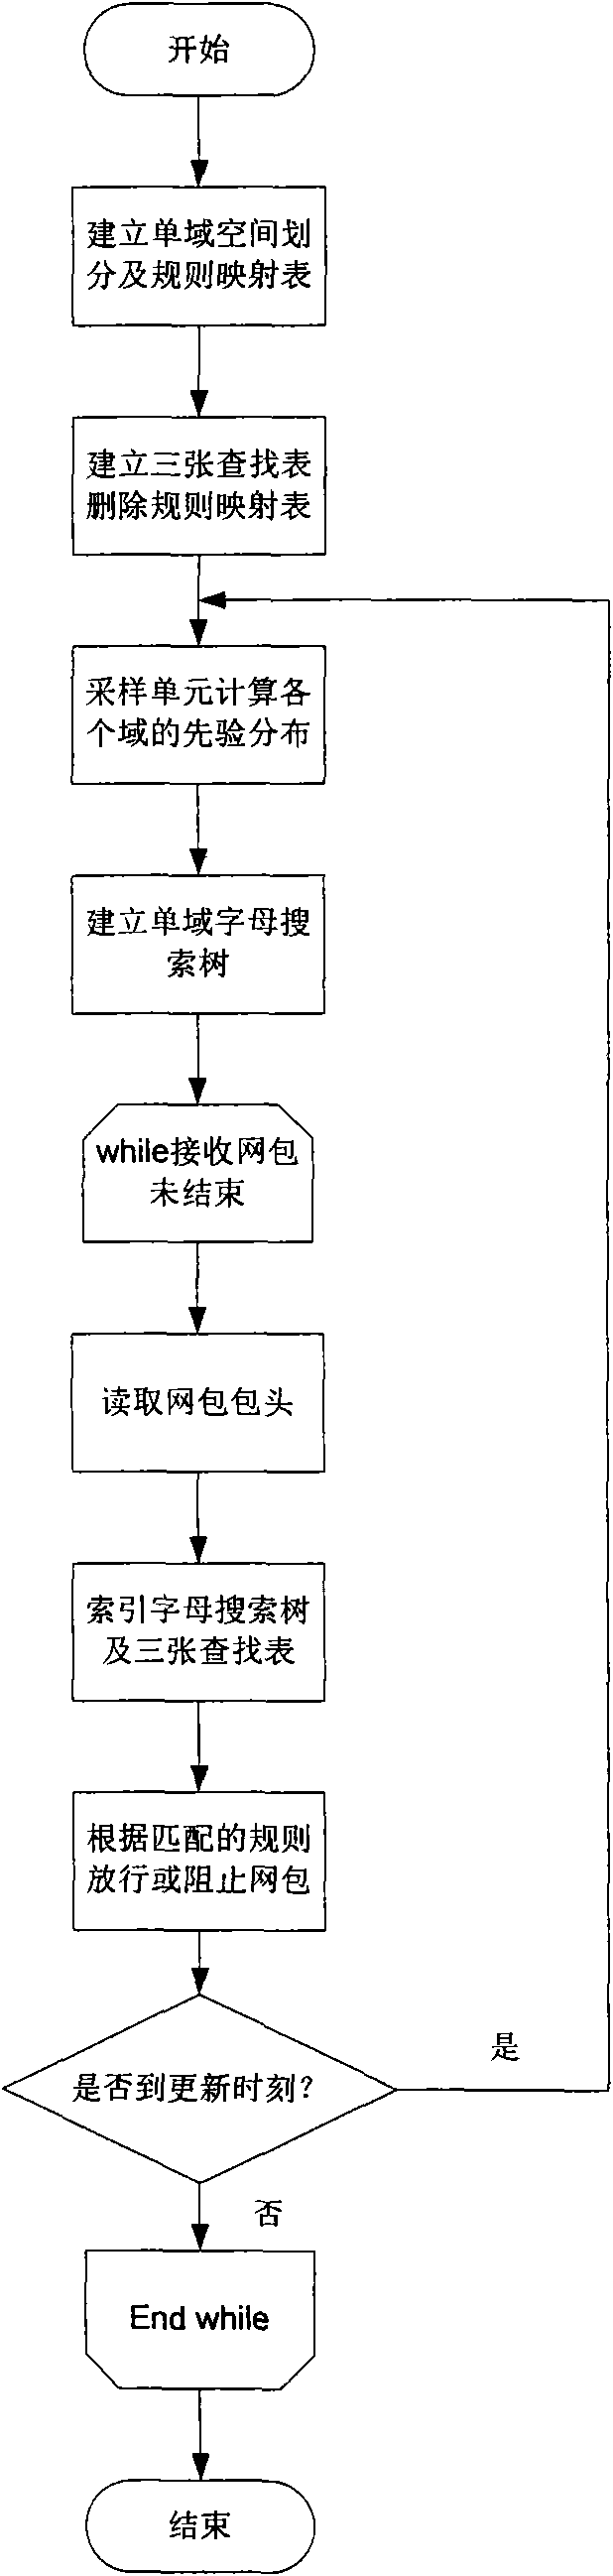 Rapid network packet classification method based on network traffic statistic information